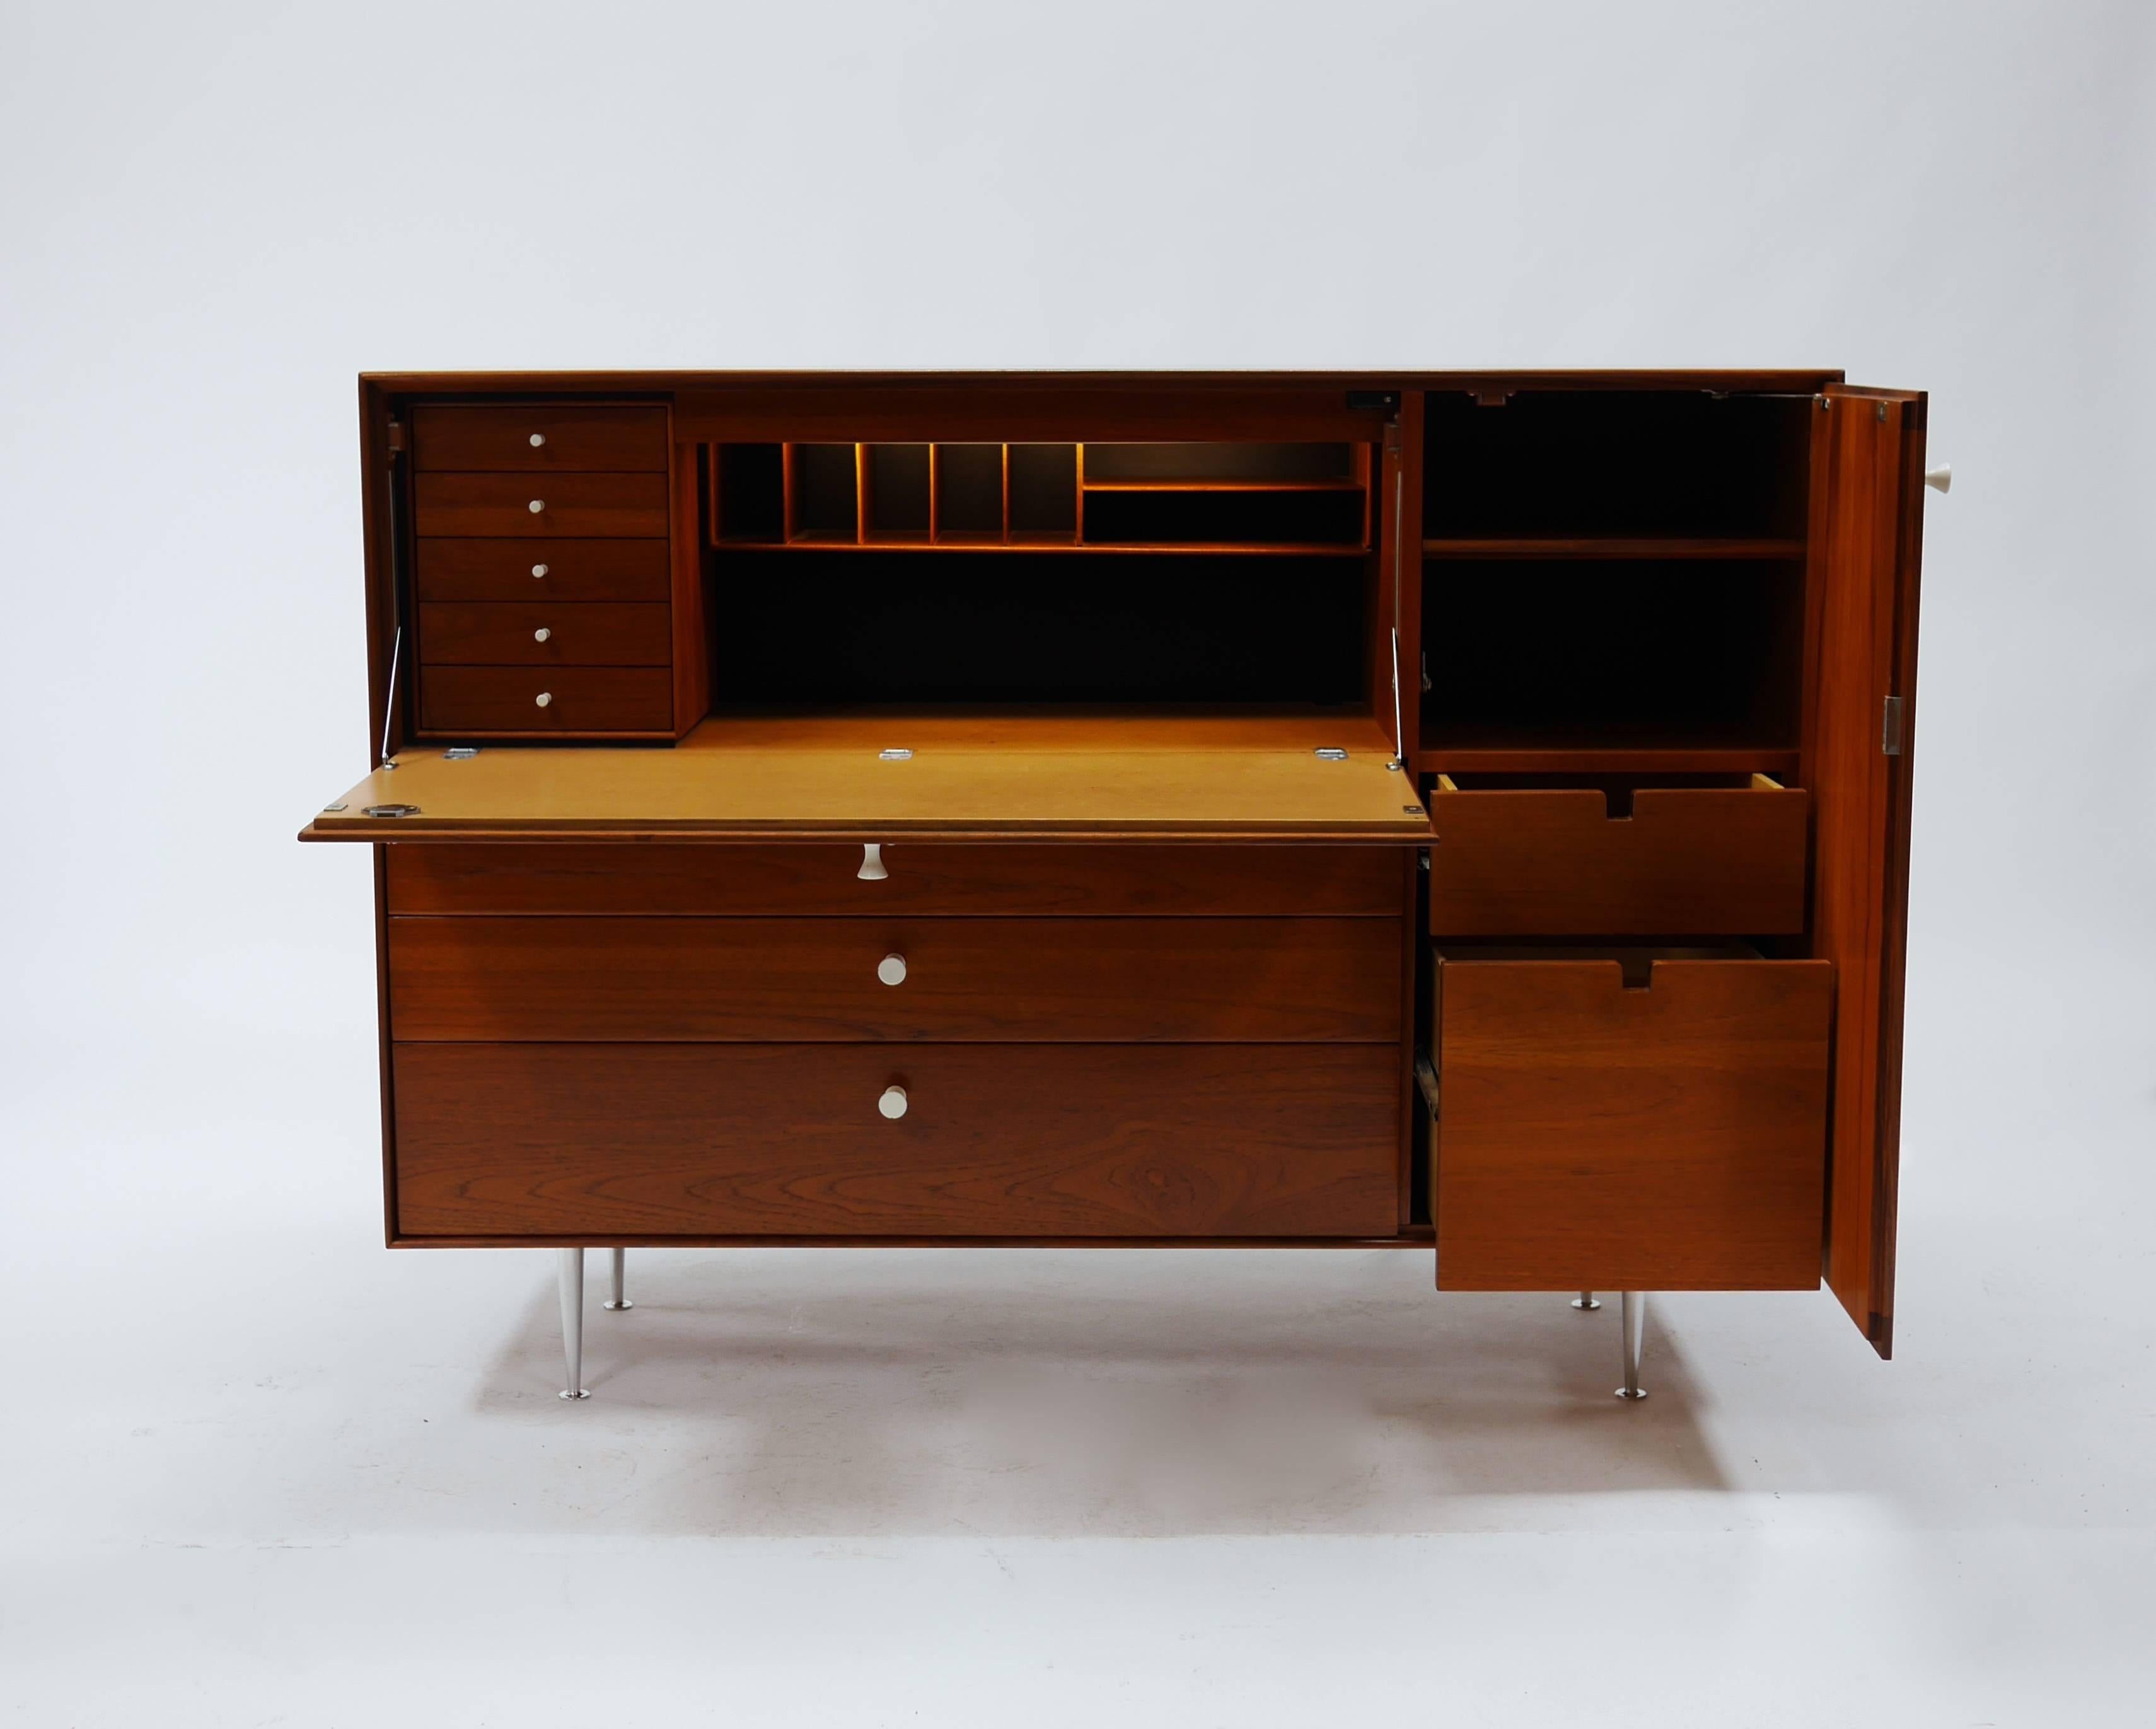 Beautiful secretary or storage cabinet/ desk by George Nelson for Herman Miller. Large-scale cabinet in walnut veneer, raised on turned aluminum legs. Three deep drawers, and a hinged door concealing open shelves and a single drawer. The drop front